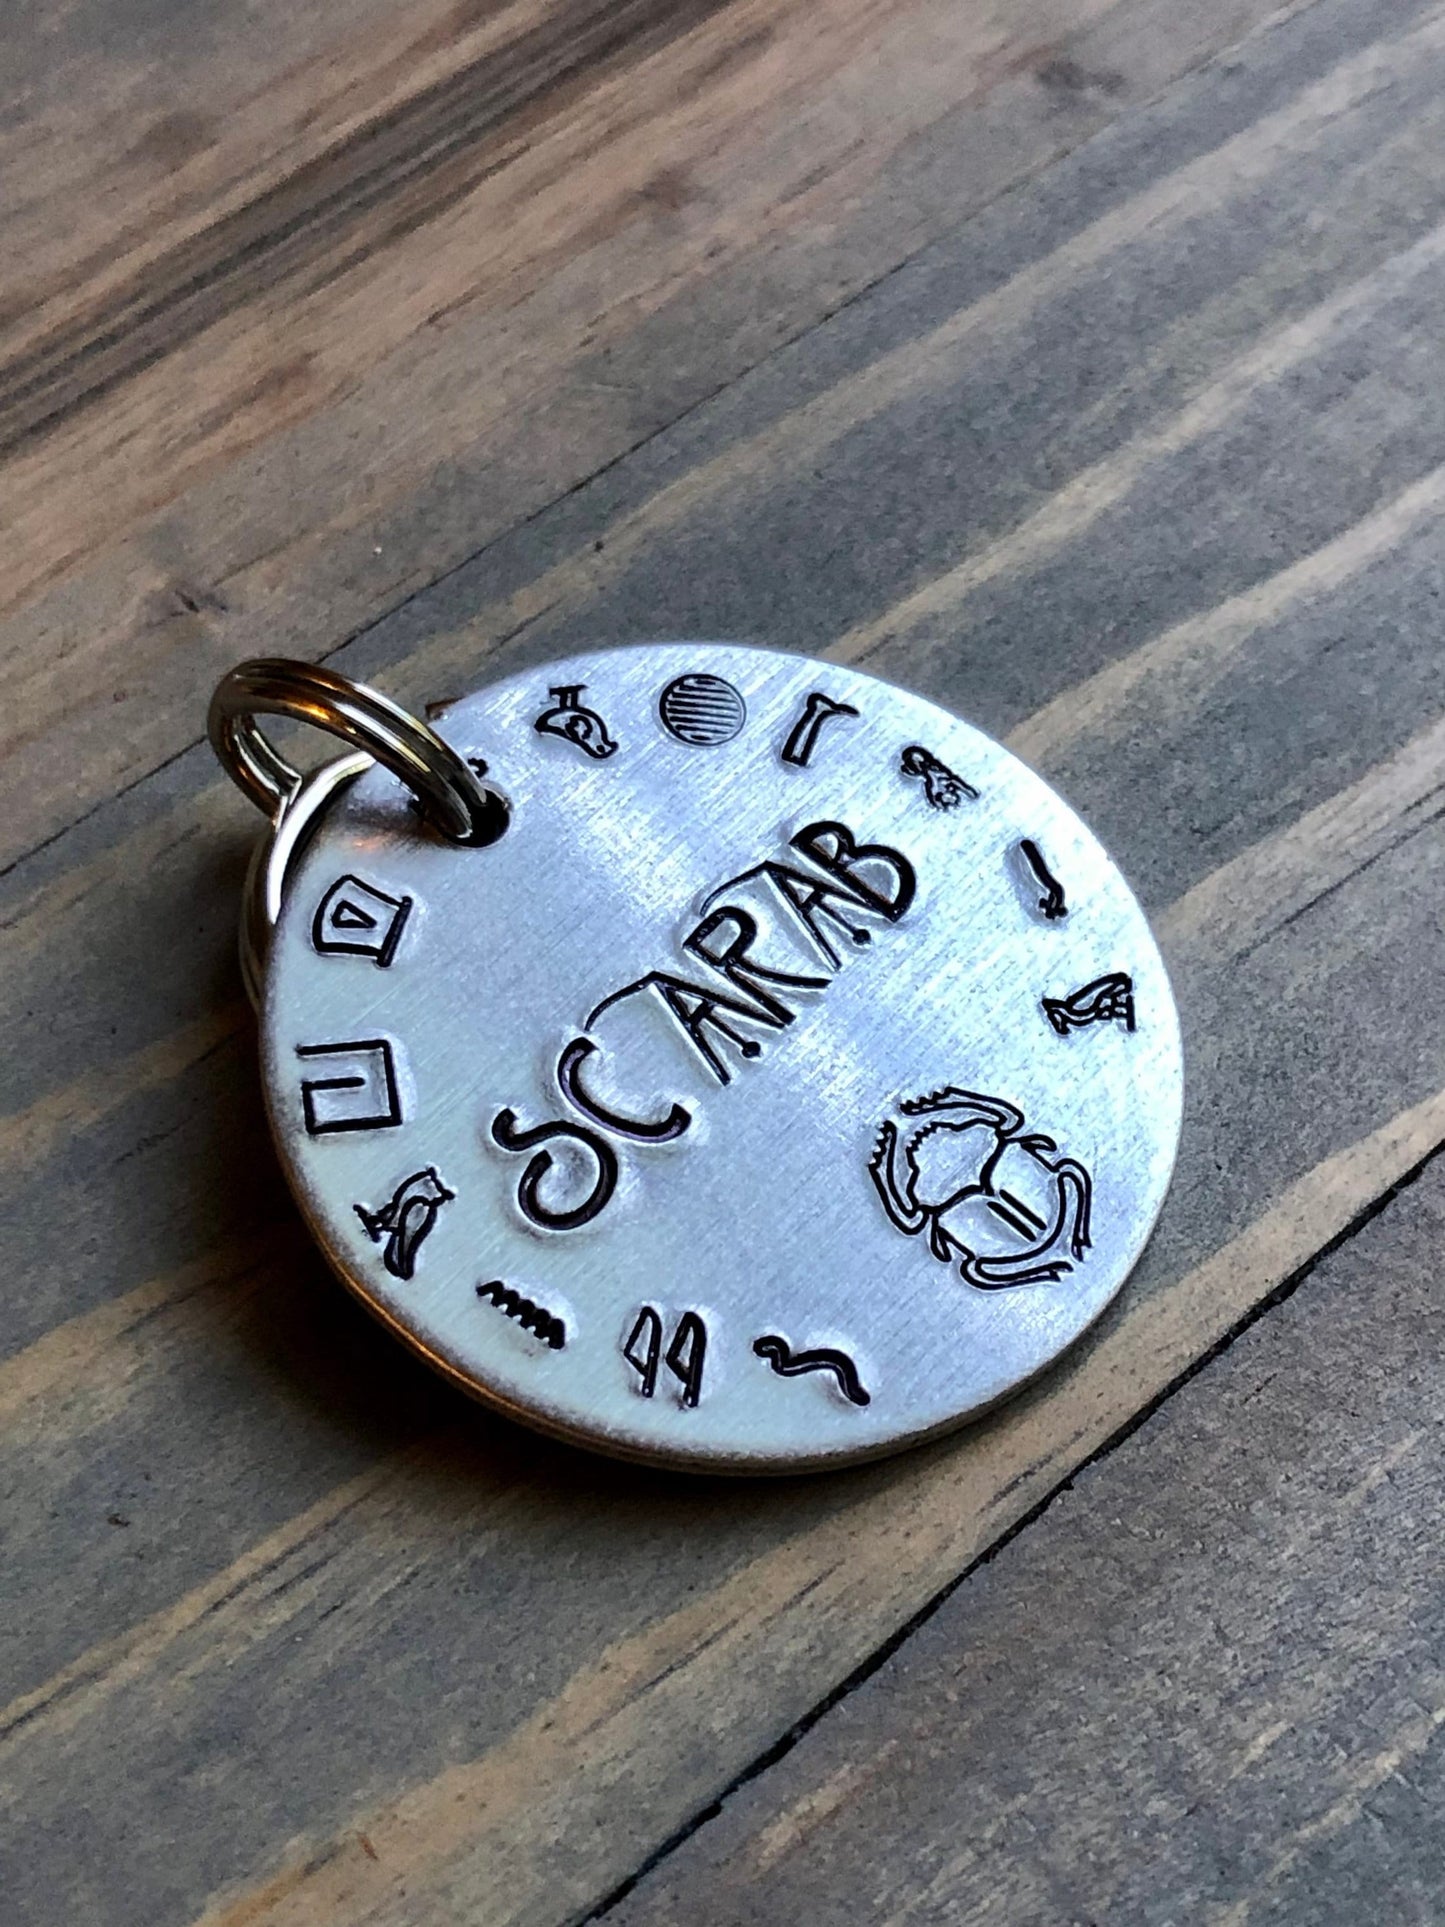 Scarab Name Tag for Dog, Hand Stamped Pet ID Tag, Egyptian Hieroglyphs, Personalized Dog Tag for Dog, Pet ID with Scarab, Rescue Dog, Adopt